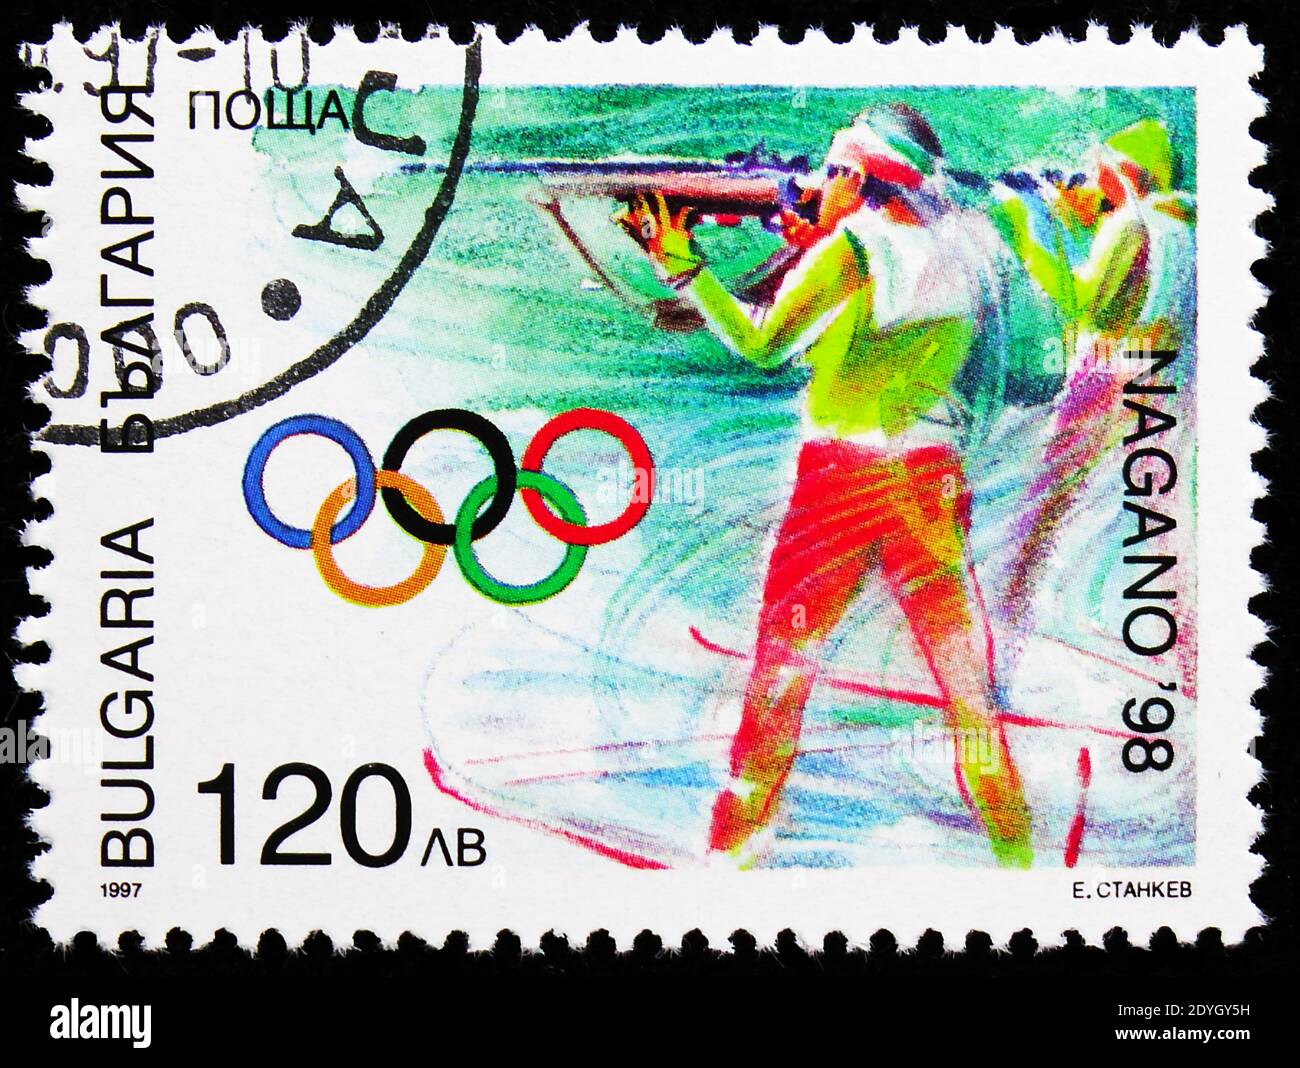 MOSCOW, RUSSIA - AUGUST 8, 2019: Postage stamp printed in Bulgaria shows Biathlon, Winter Olympic Games 1998 - Nagano serie, circa 1997 Stock Photo